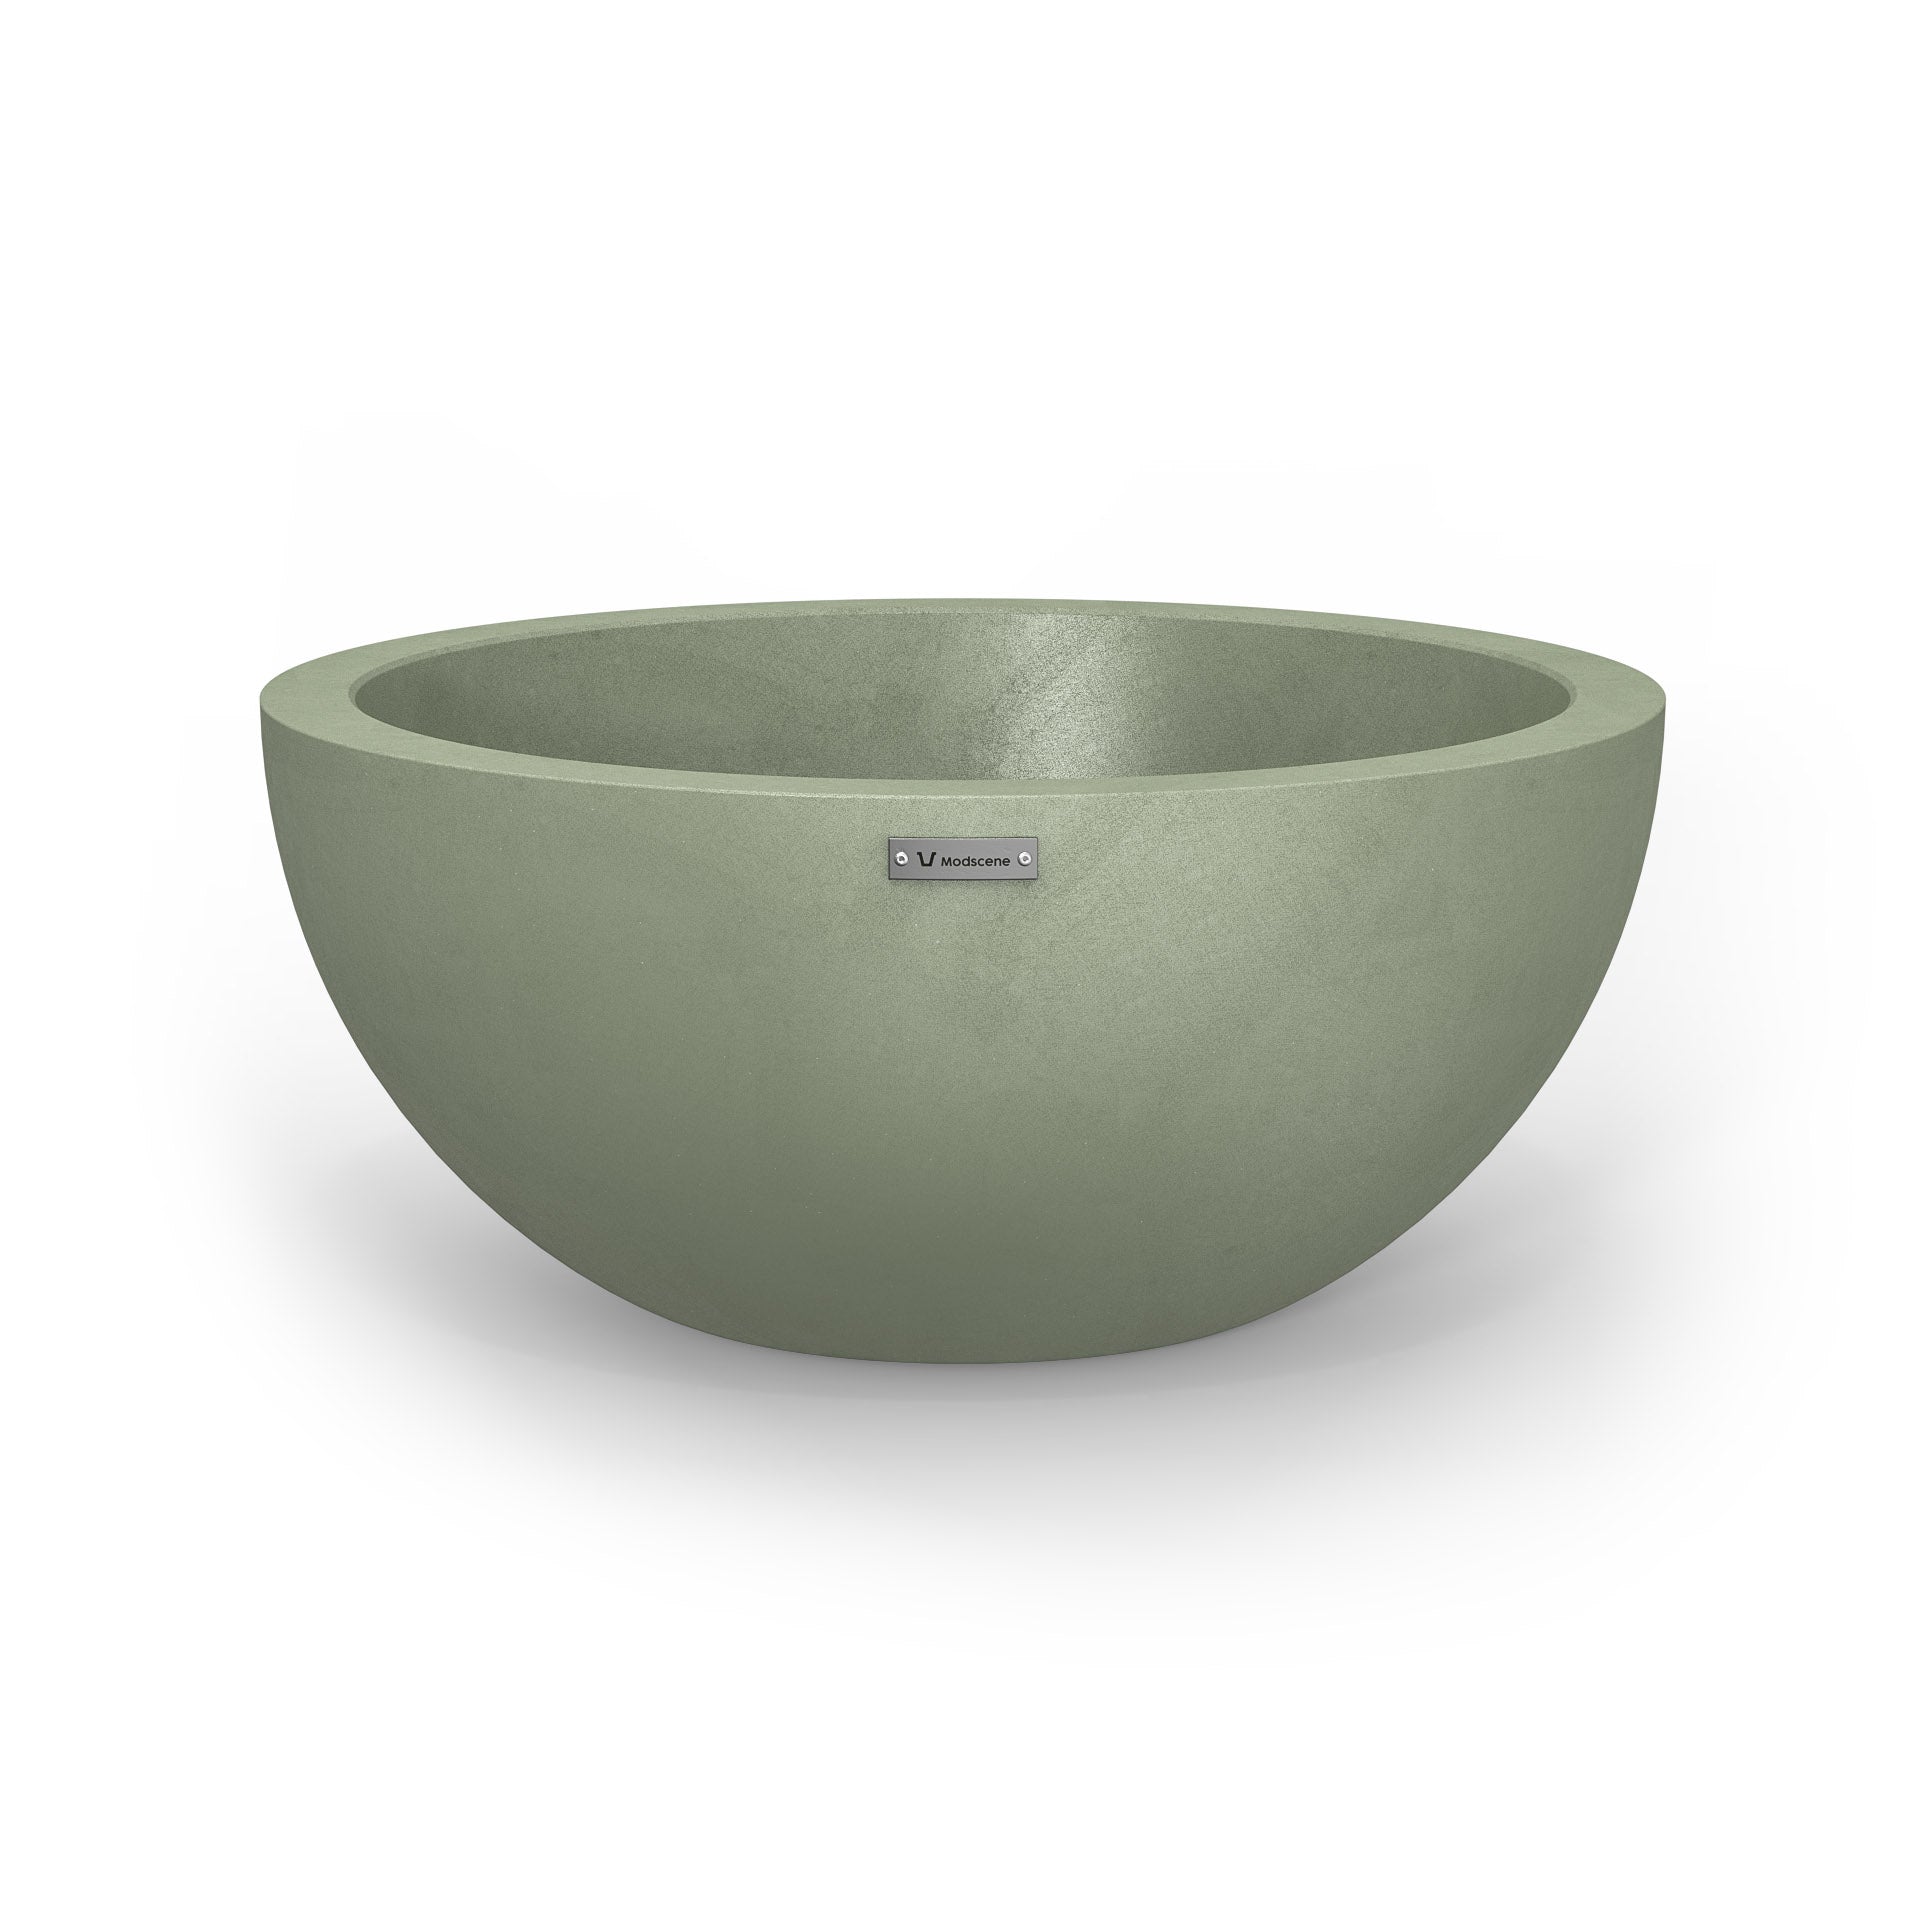 A medium Modscene planter bowl in pastel green with a concrete look.